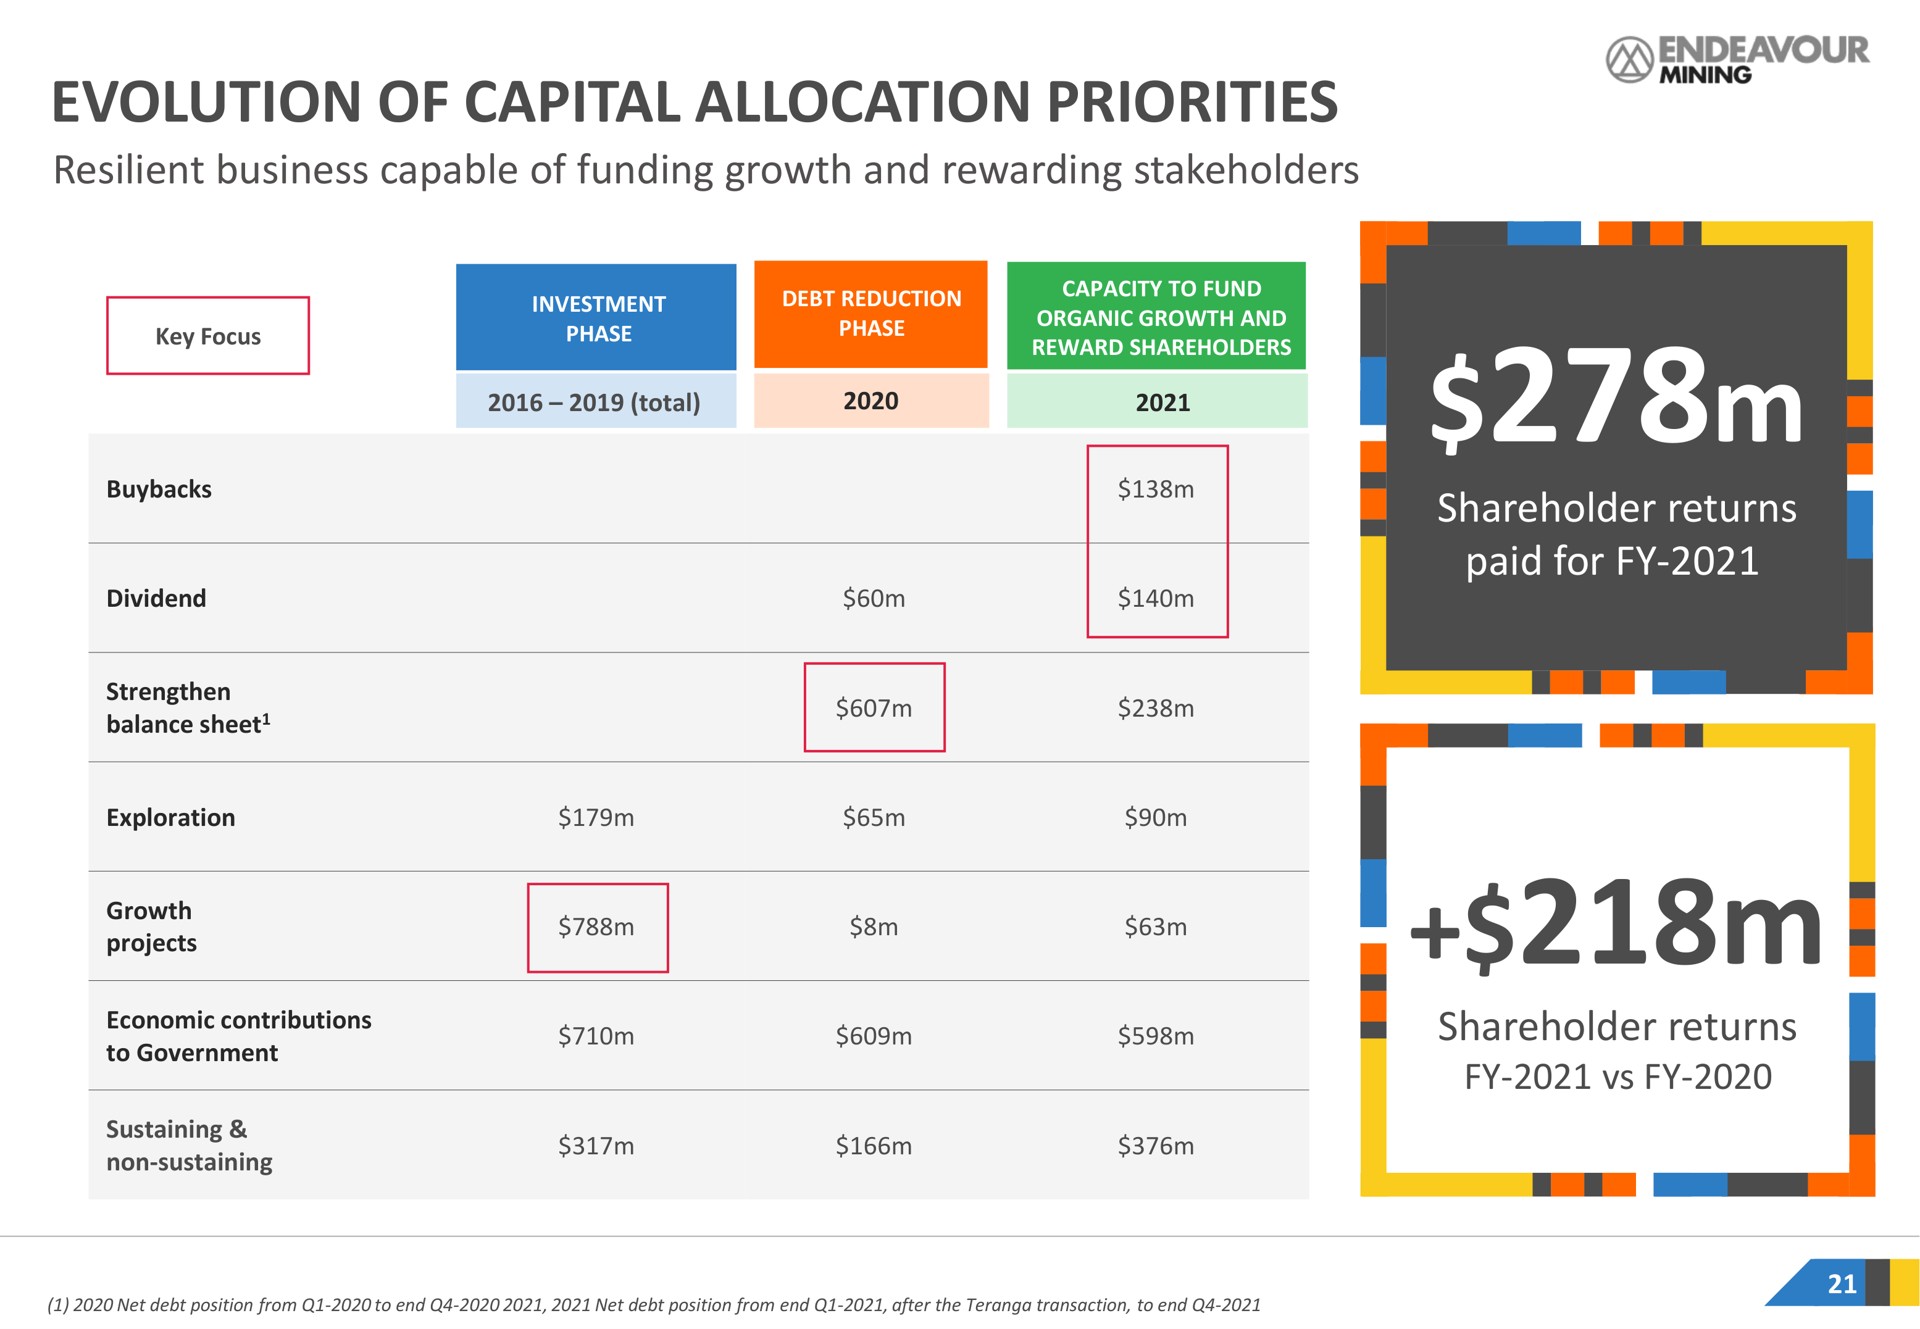 evolution of capital allocation priorities resilient business capable of funding growth and rewarding stakeholders shareholder returns paid for shareholder returns a | Endeavour Mining